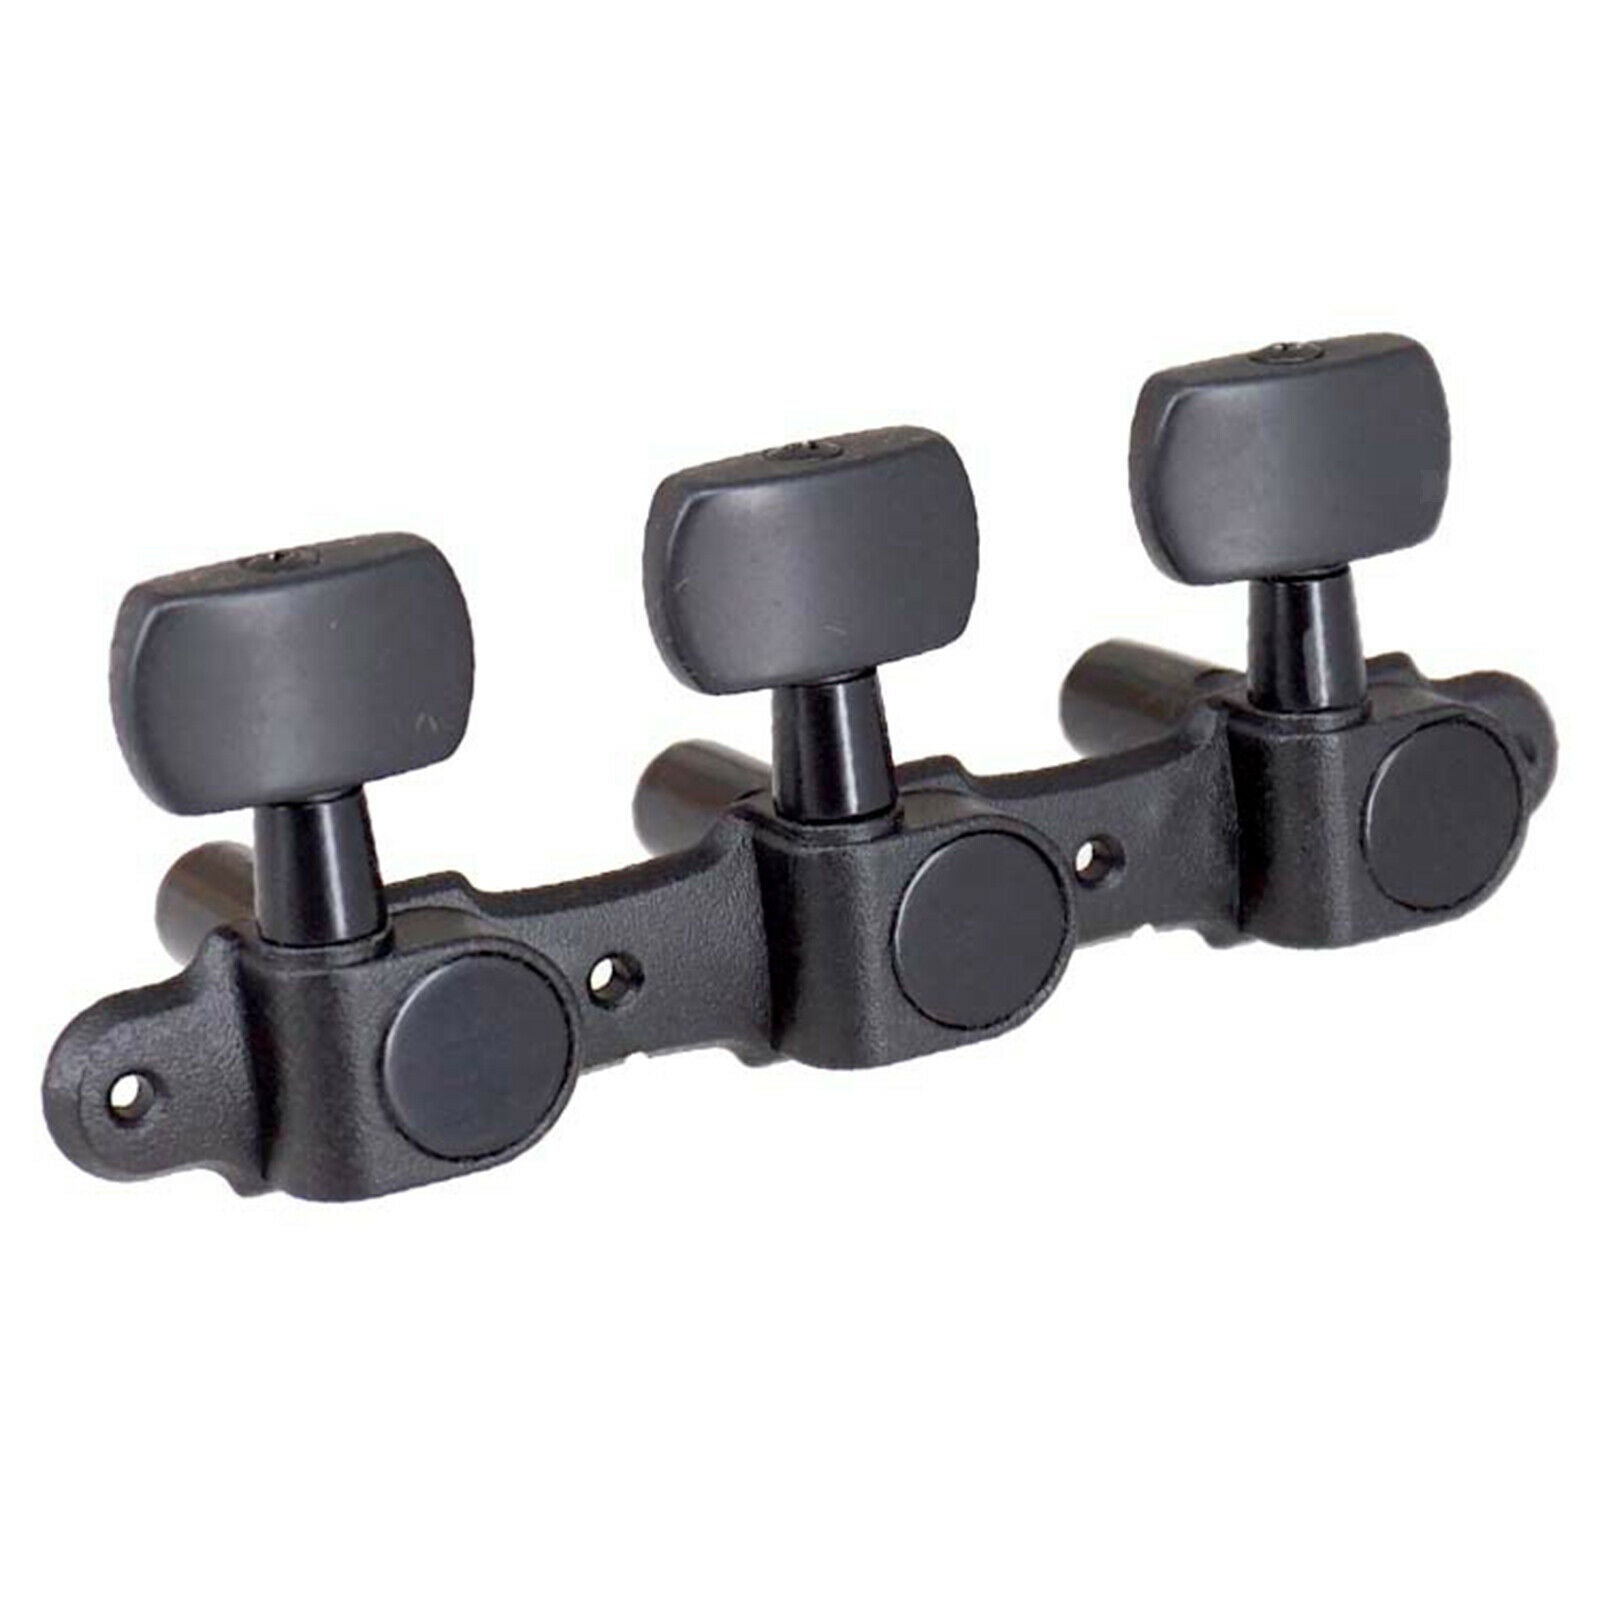 Set of 2 Acoustic Guitar Tuners Pegs Machine Heads Black Acoustic Guitar